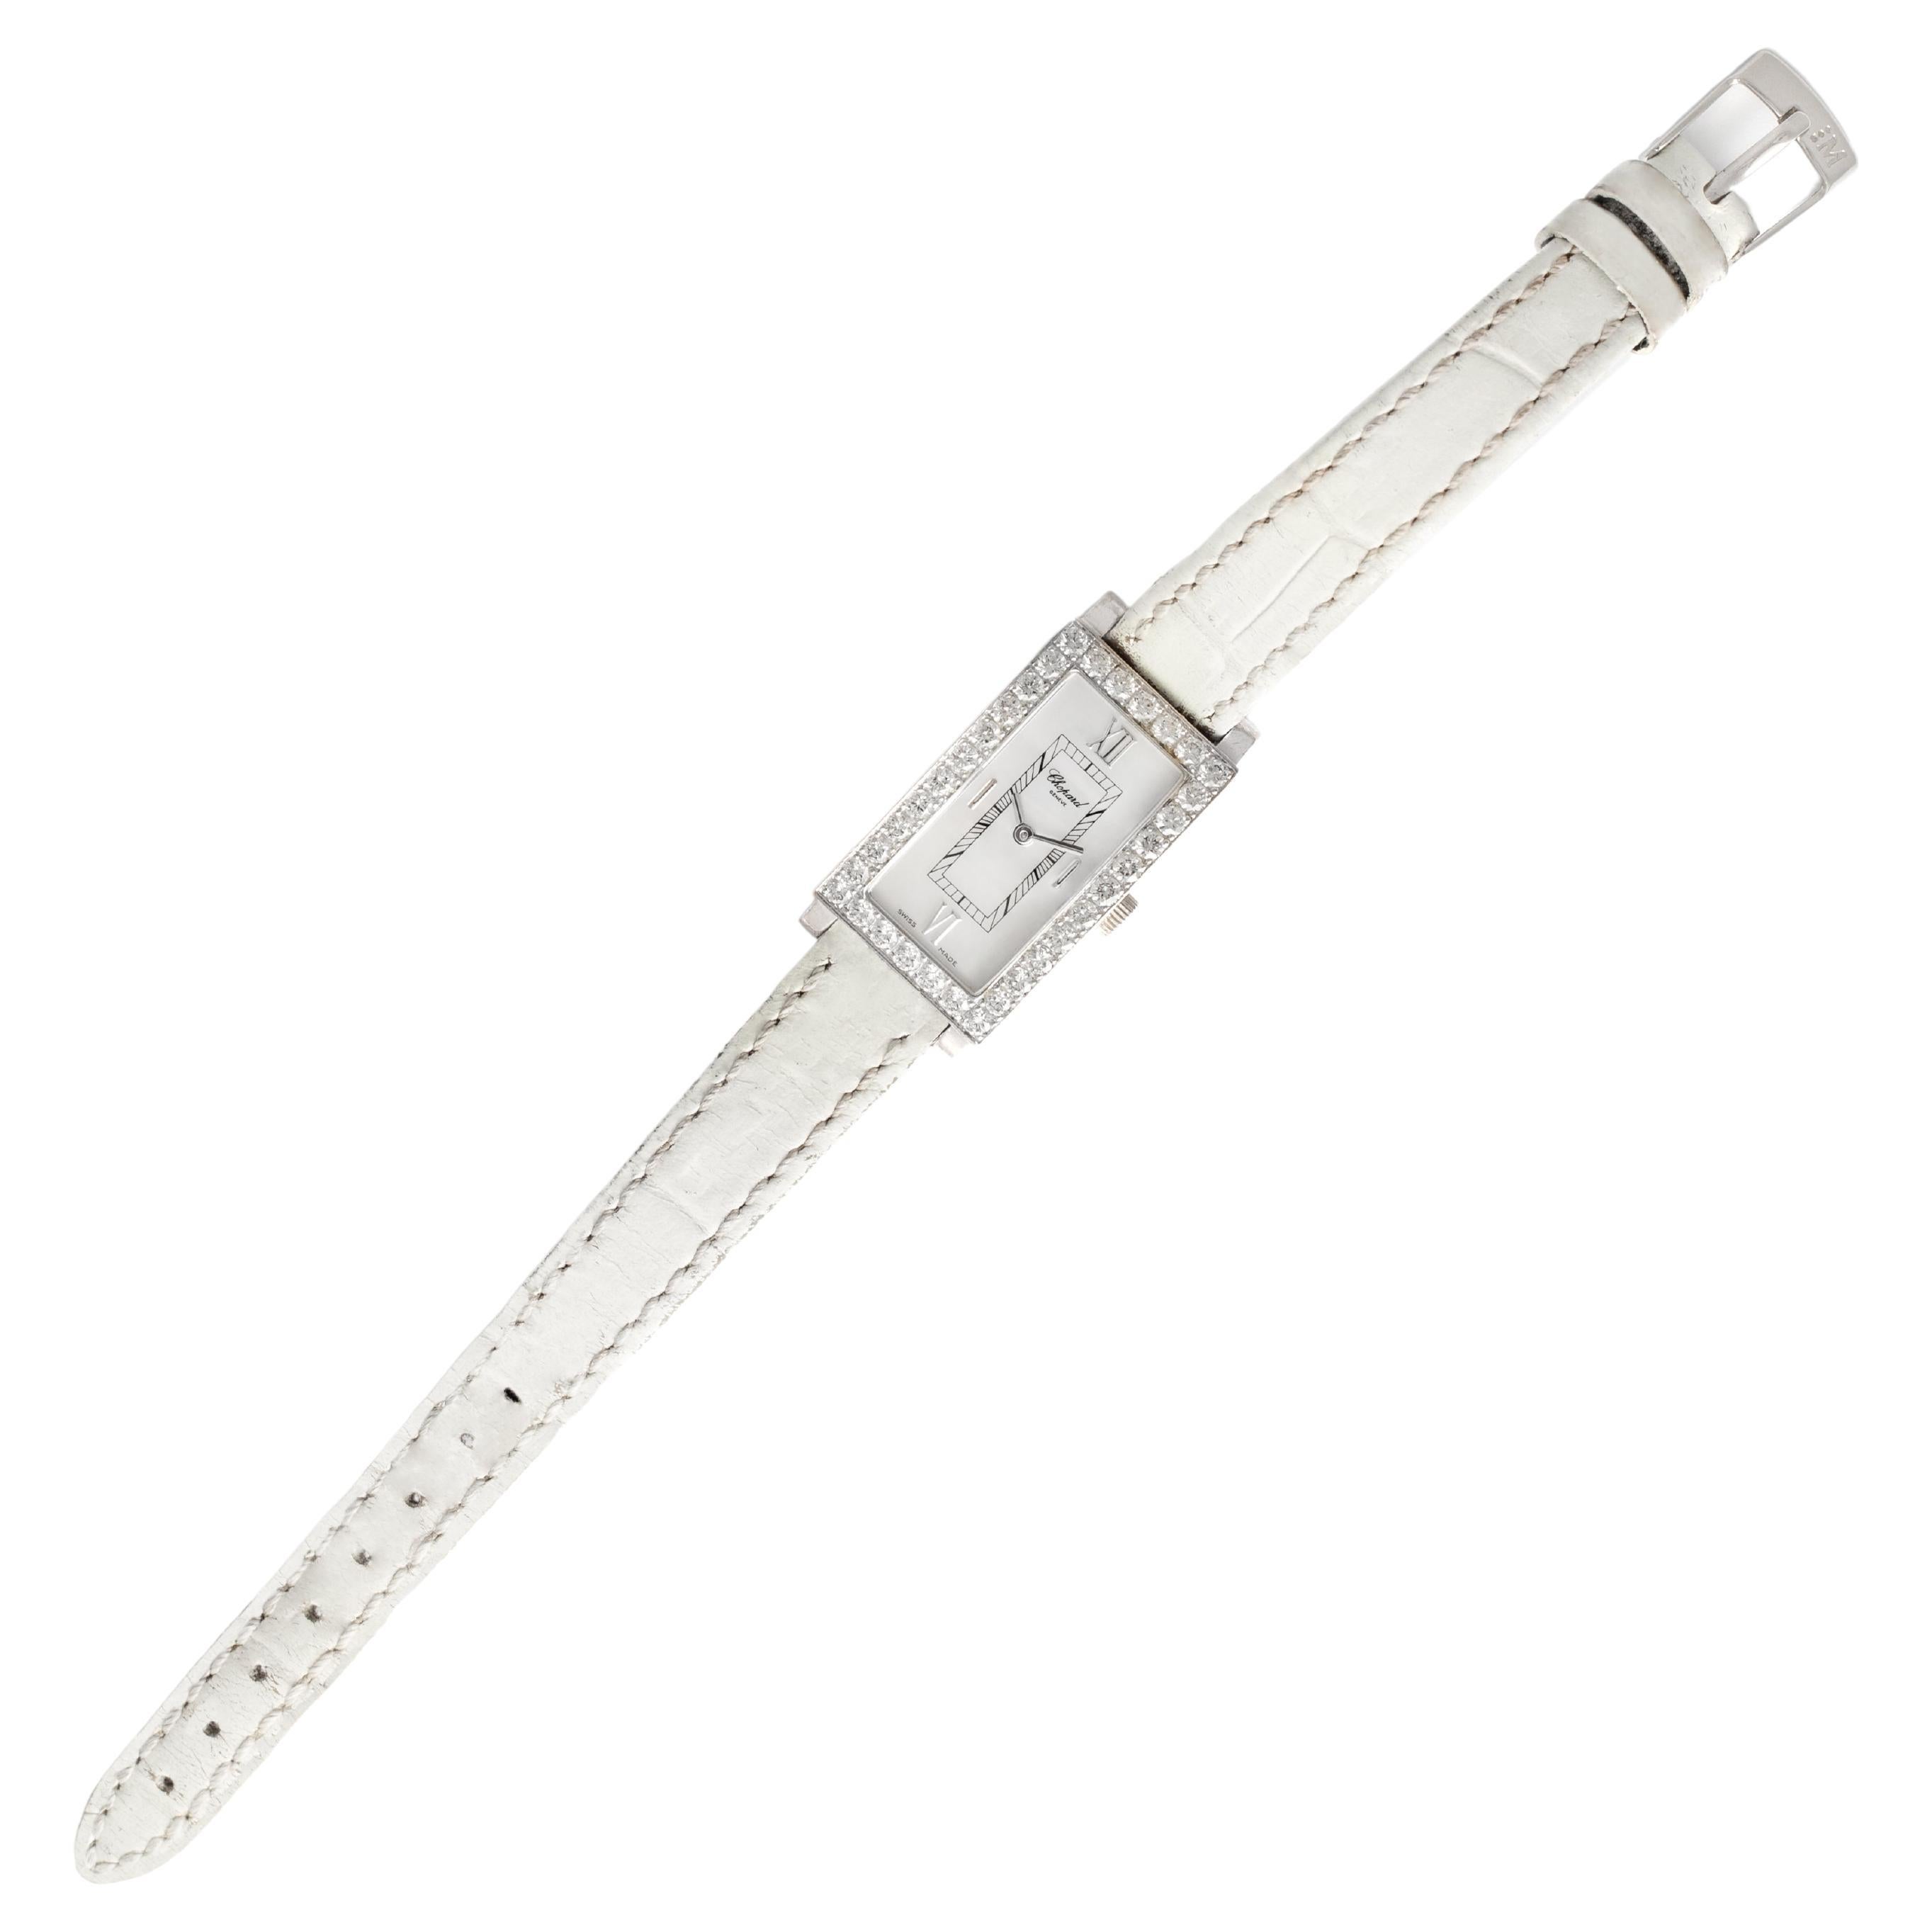 Chopard Diamond 18K white gold wristwatch. 
Mother-of-pearl Rectangle dial.
Signed Chopard. Numbered 13/6973-20. 559119, 488 1.
Swiss marks.
Strap is delivered brand new to the new buyer.

This beautiful Chopard Ladies Rectangle Wristwatch in 18